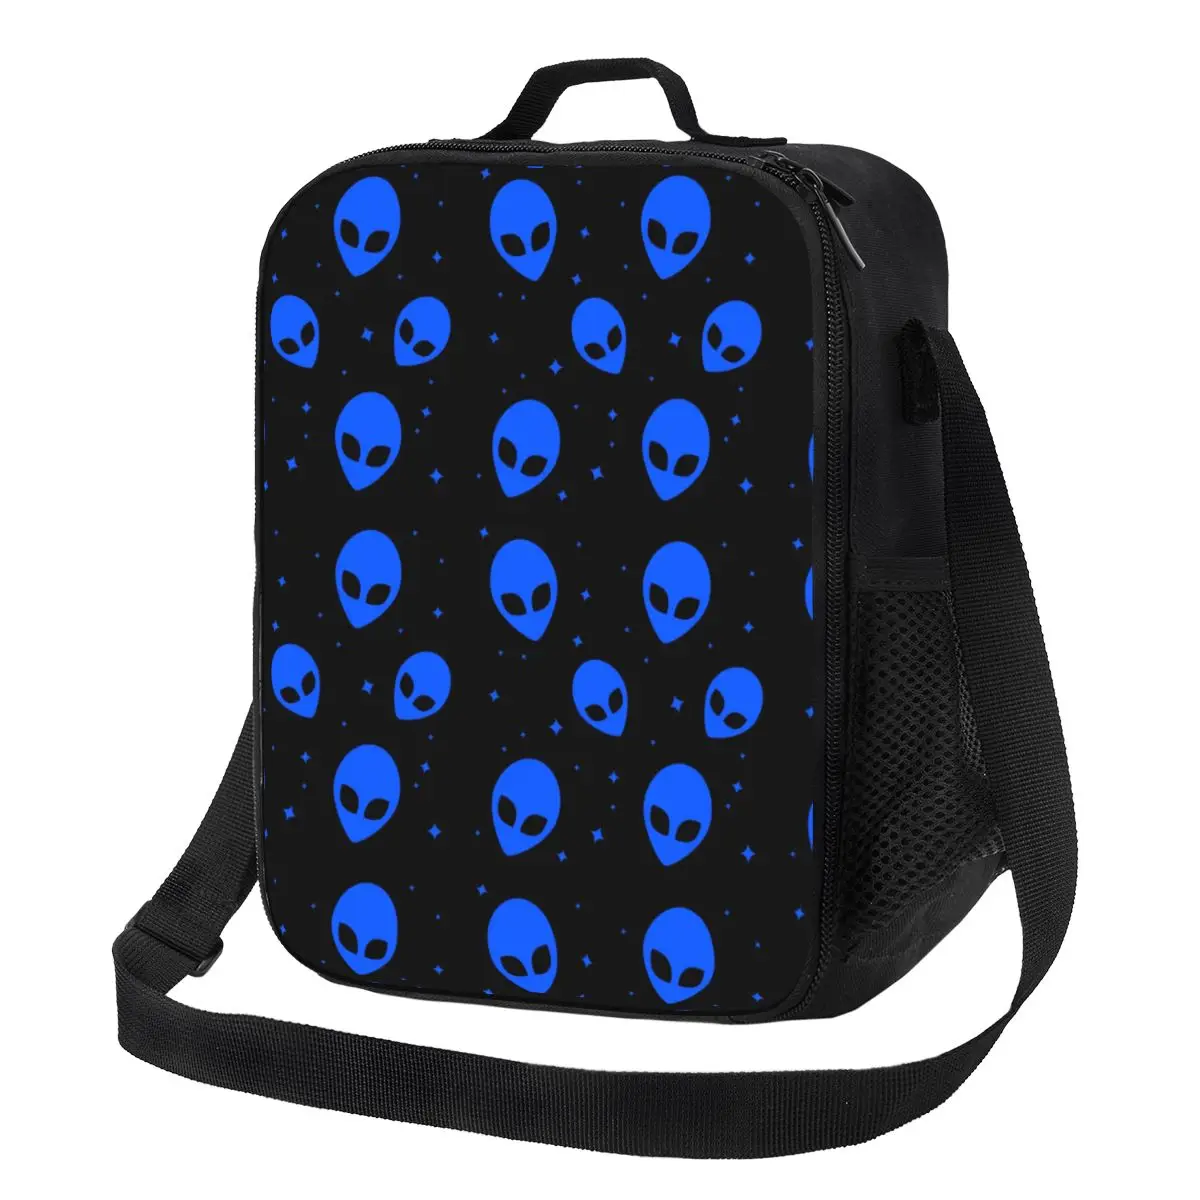 

Blue Black Sci Fi Alien Pattern Thermal Insulated Lunch Bag Women Portable Lunch Tote for School Multifunction Bento Food Box